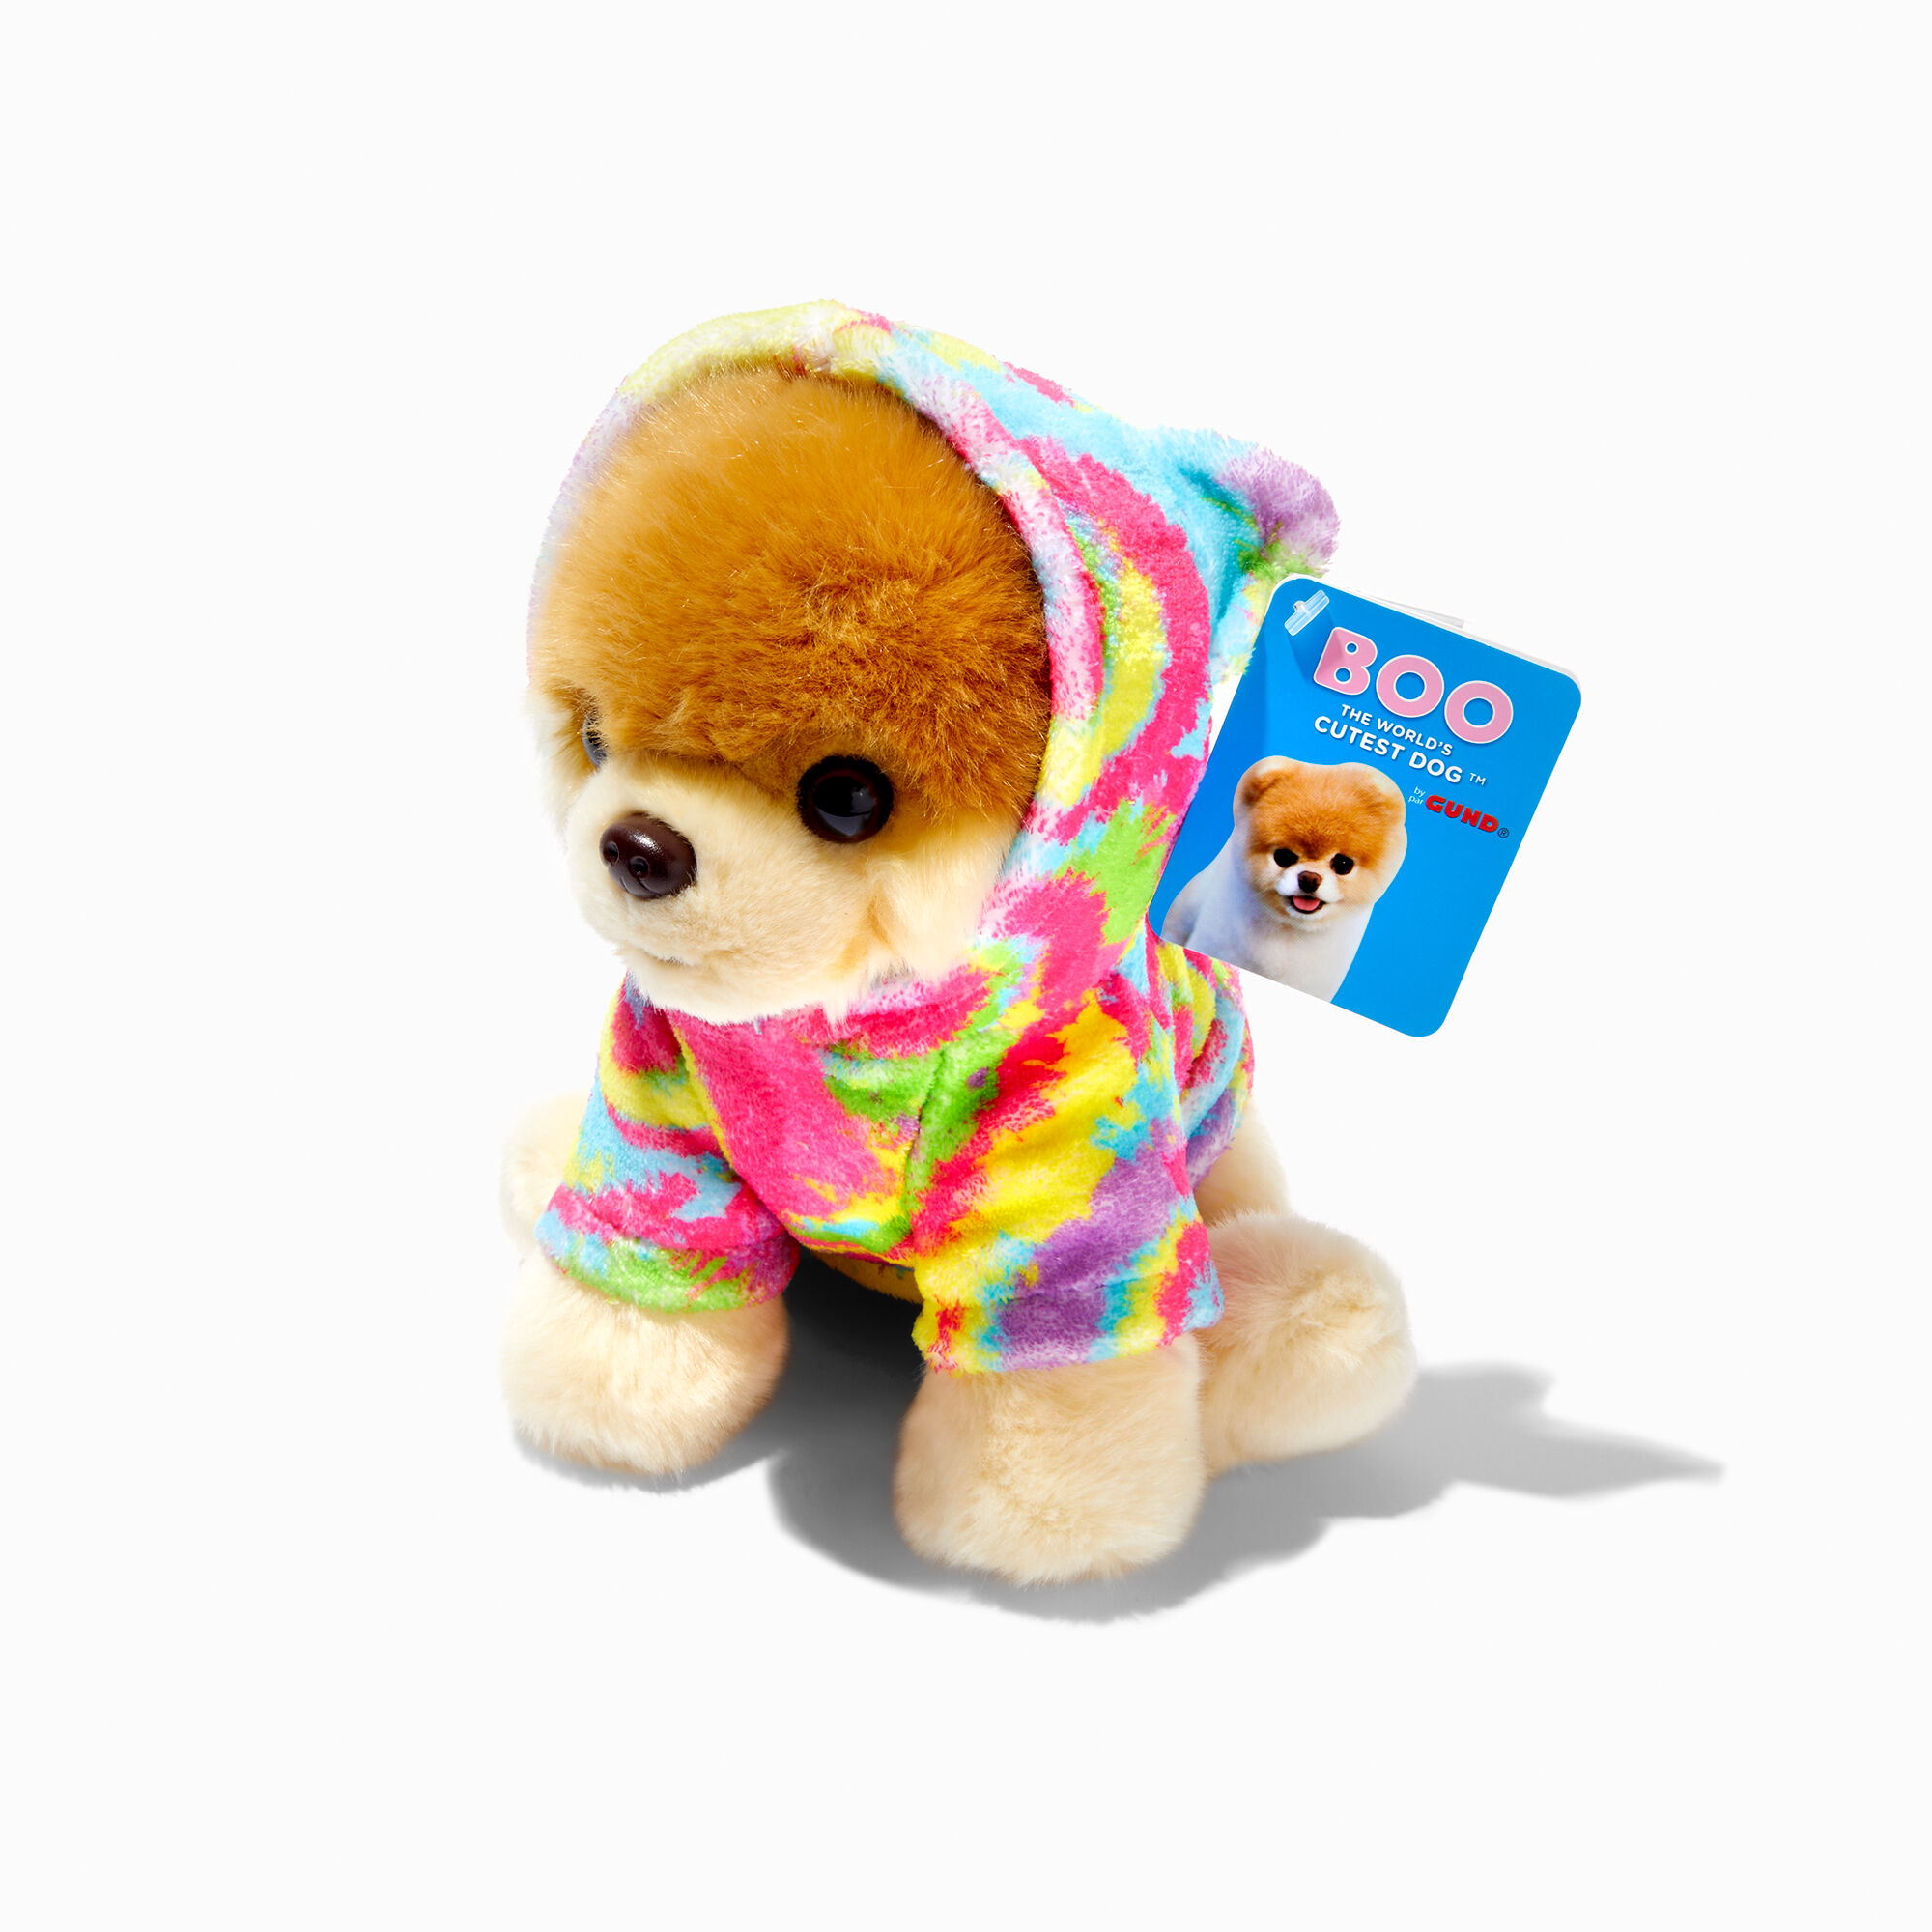 View Claires Boo The Worlds Cutest Dog Tie Dye Soft Toy information